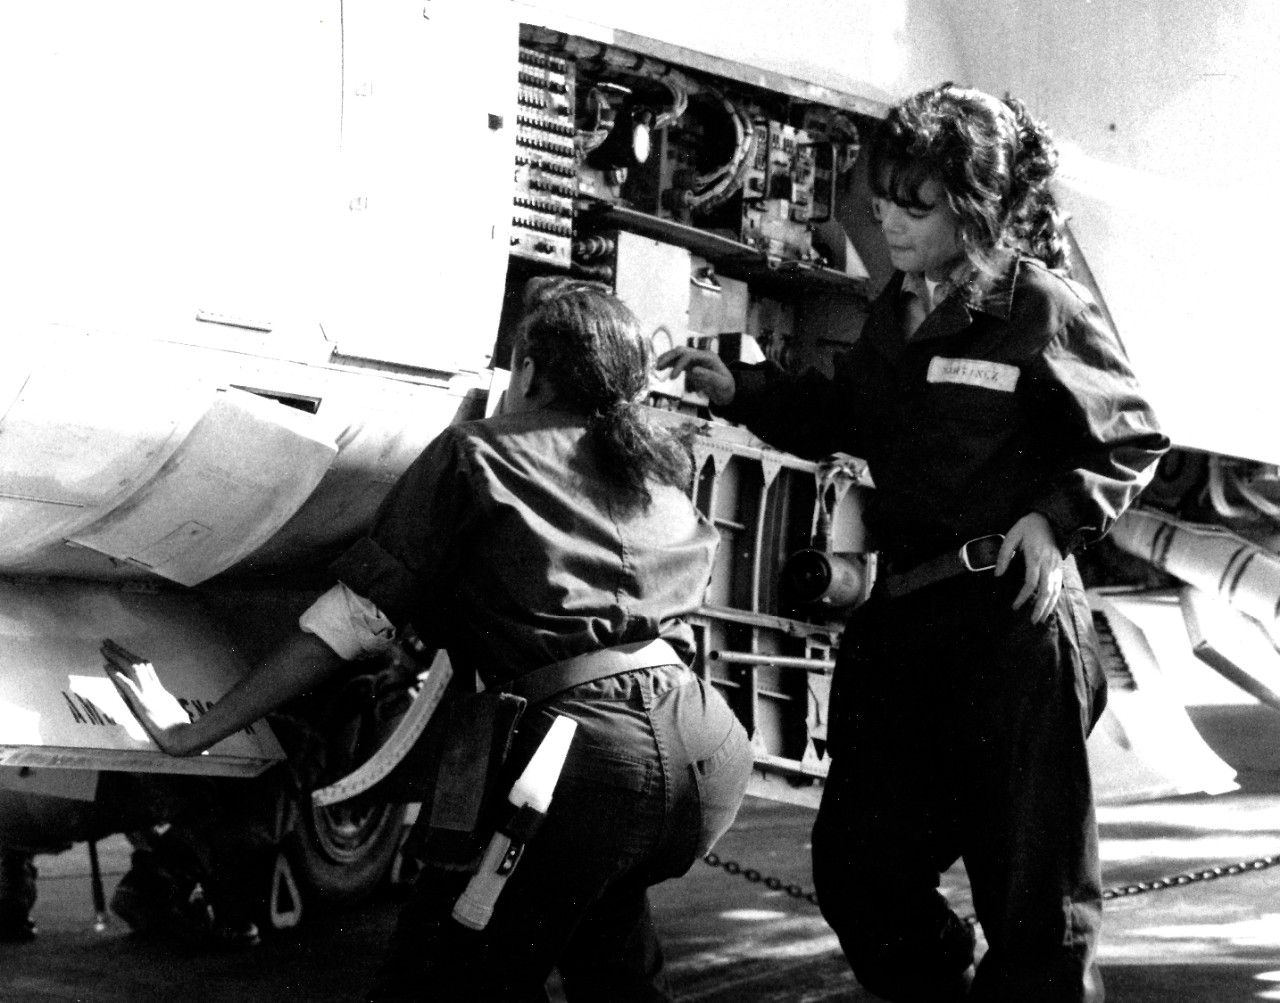 330-CFD-DN-SN-89-01677:   Female Airmen, November 1988.    Airman Ora Howard, Plane Captain, (left), and Airman Grisselle Martinez,  perform a routine maintenance on an A-7 Corsair II aircraft.   Photograph by JO3 Cyndi Reilly and received November 22, 1988.    Official U.S. Navy Photograph, now in the collections of the National Archives.